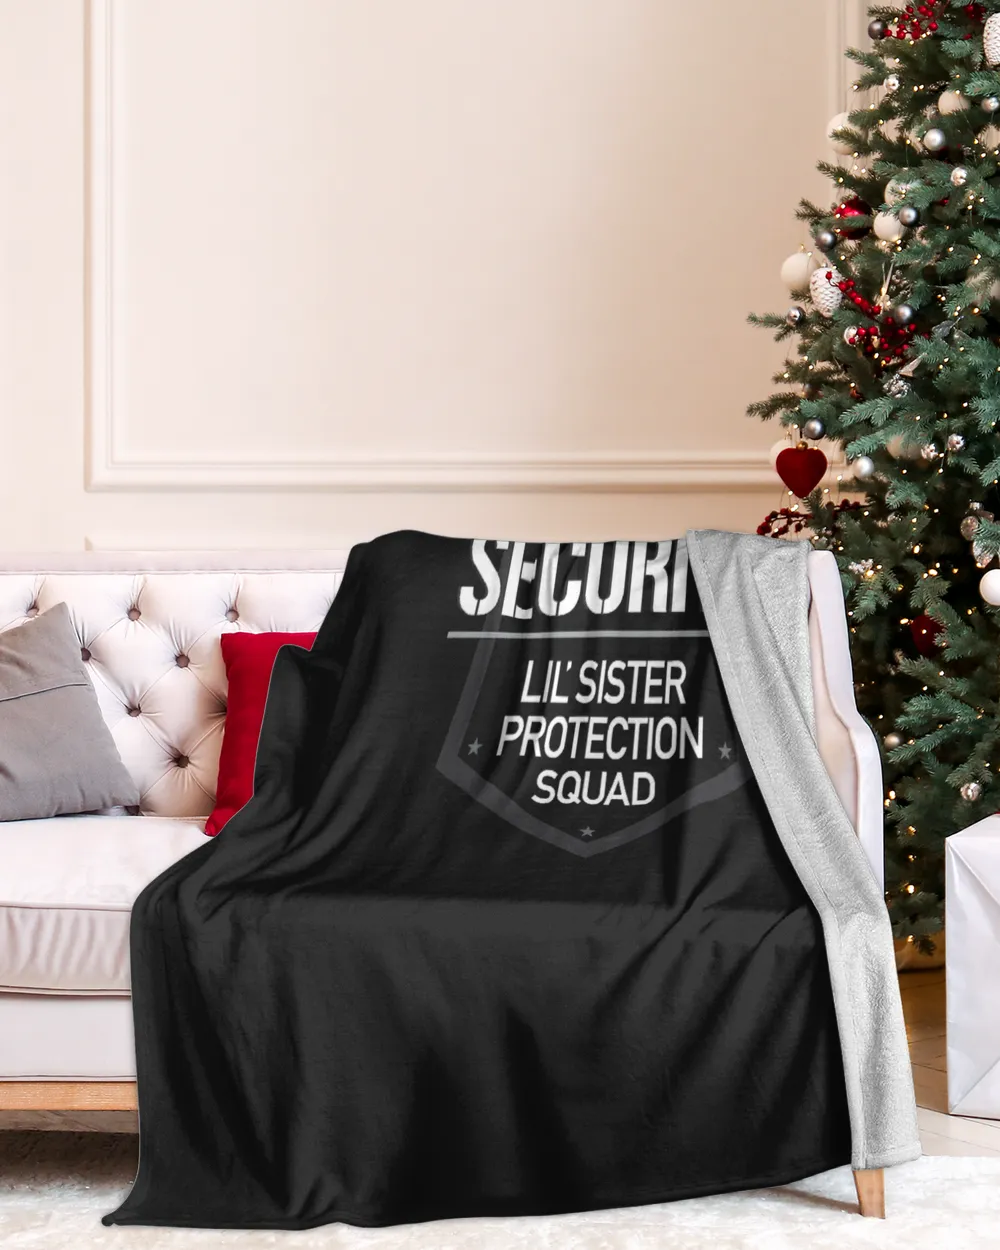 Security Lil' Sister Protection Squad Big Brother T-Shirt